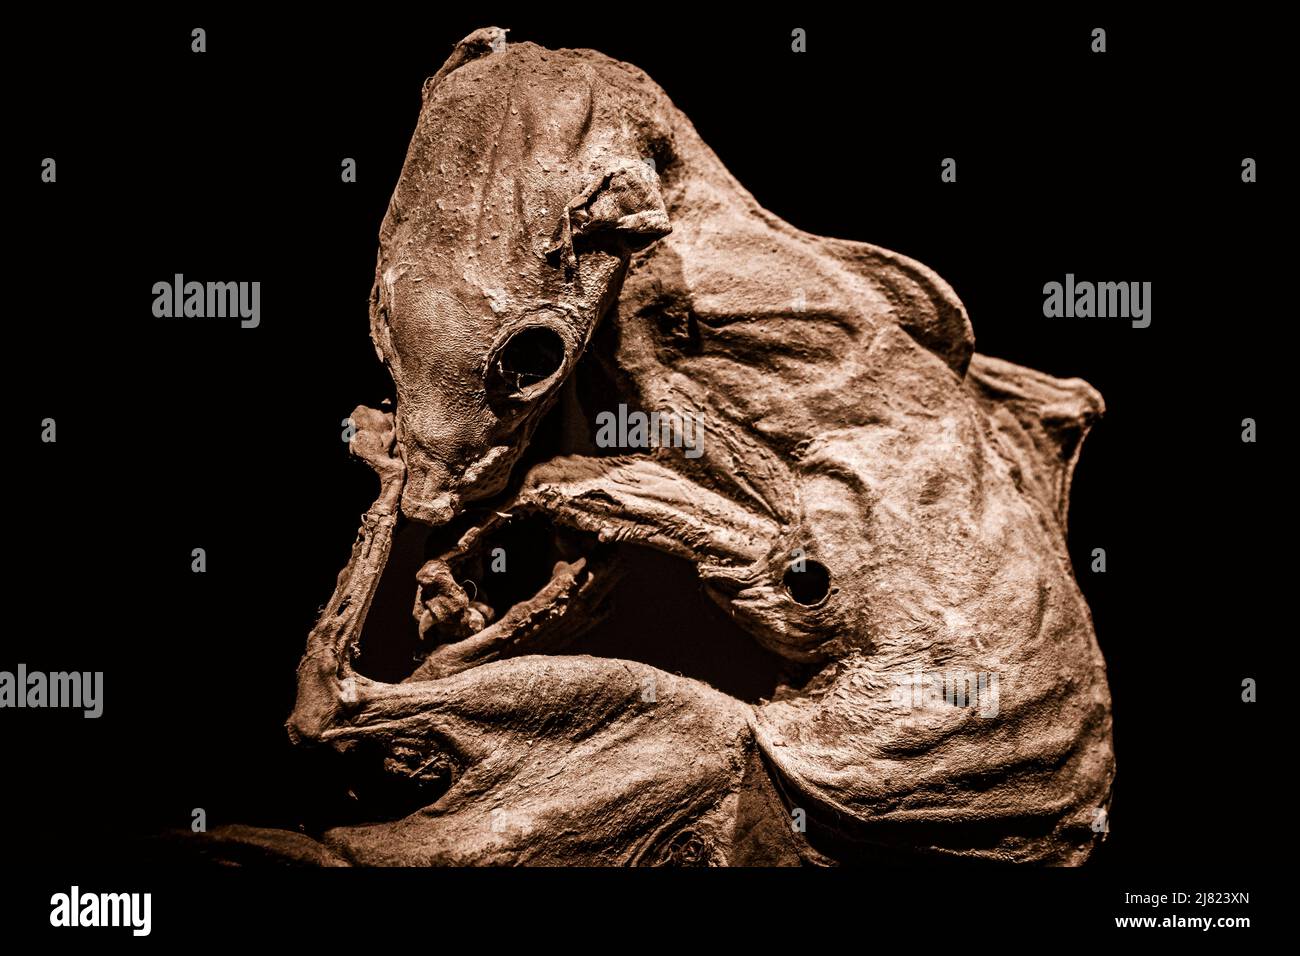 Scary close-up view of a mummified ferret or stoat isolated on black background Stock Photo